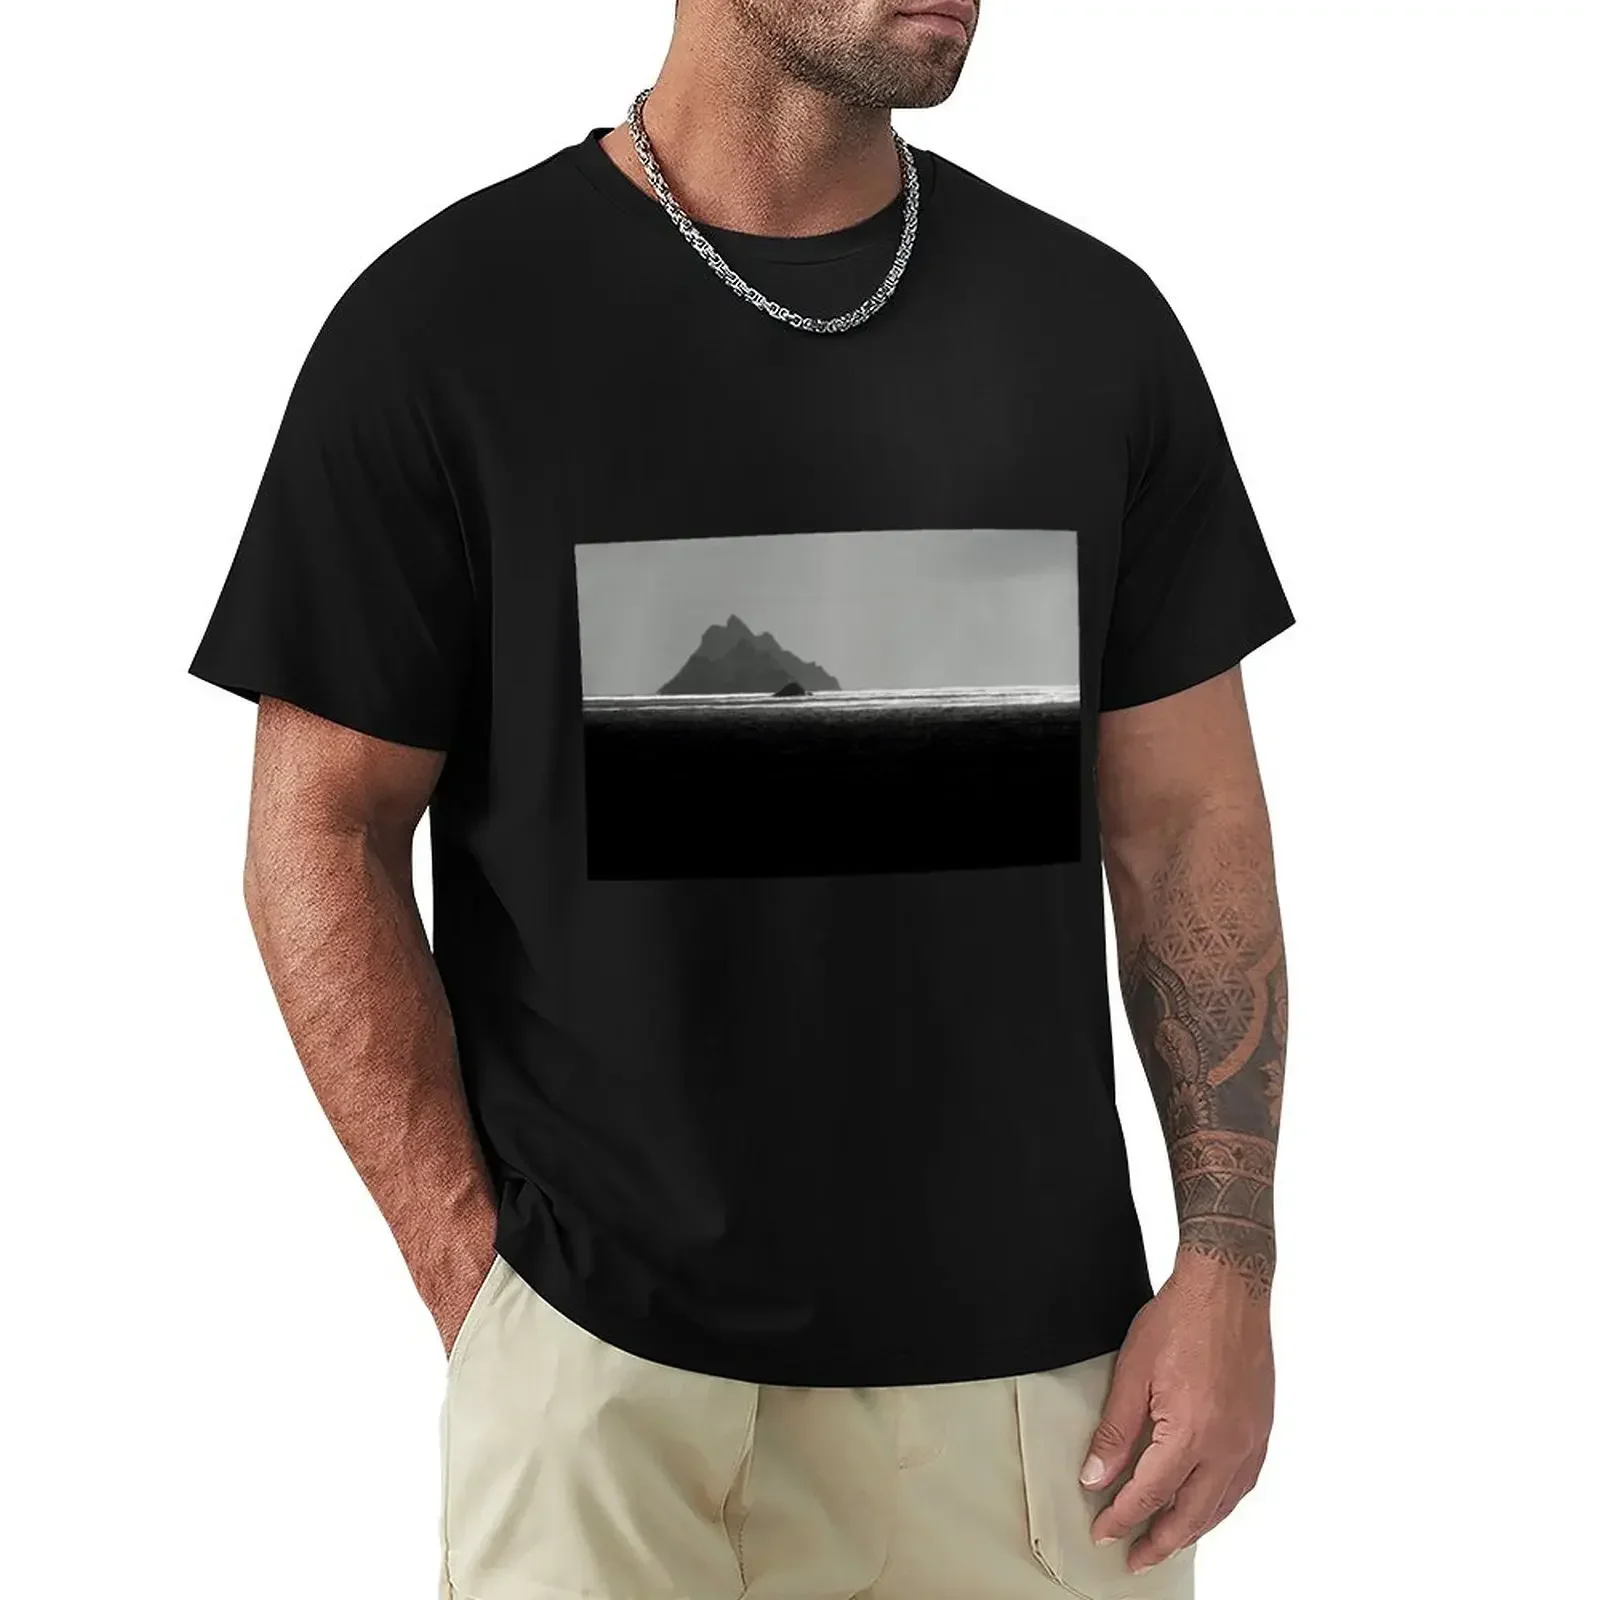 

The ancient monastic site of Skellig Michael off the Kerry coast T-Shirt tees customizeds mens t shirt graphic